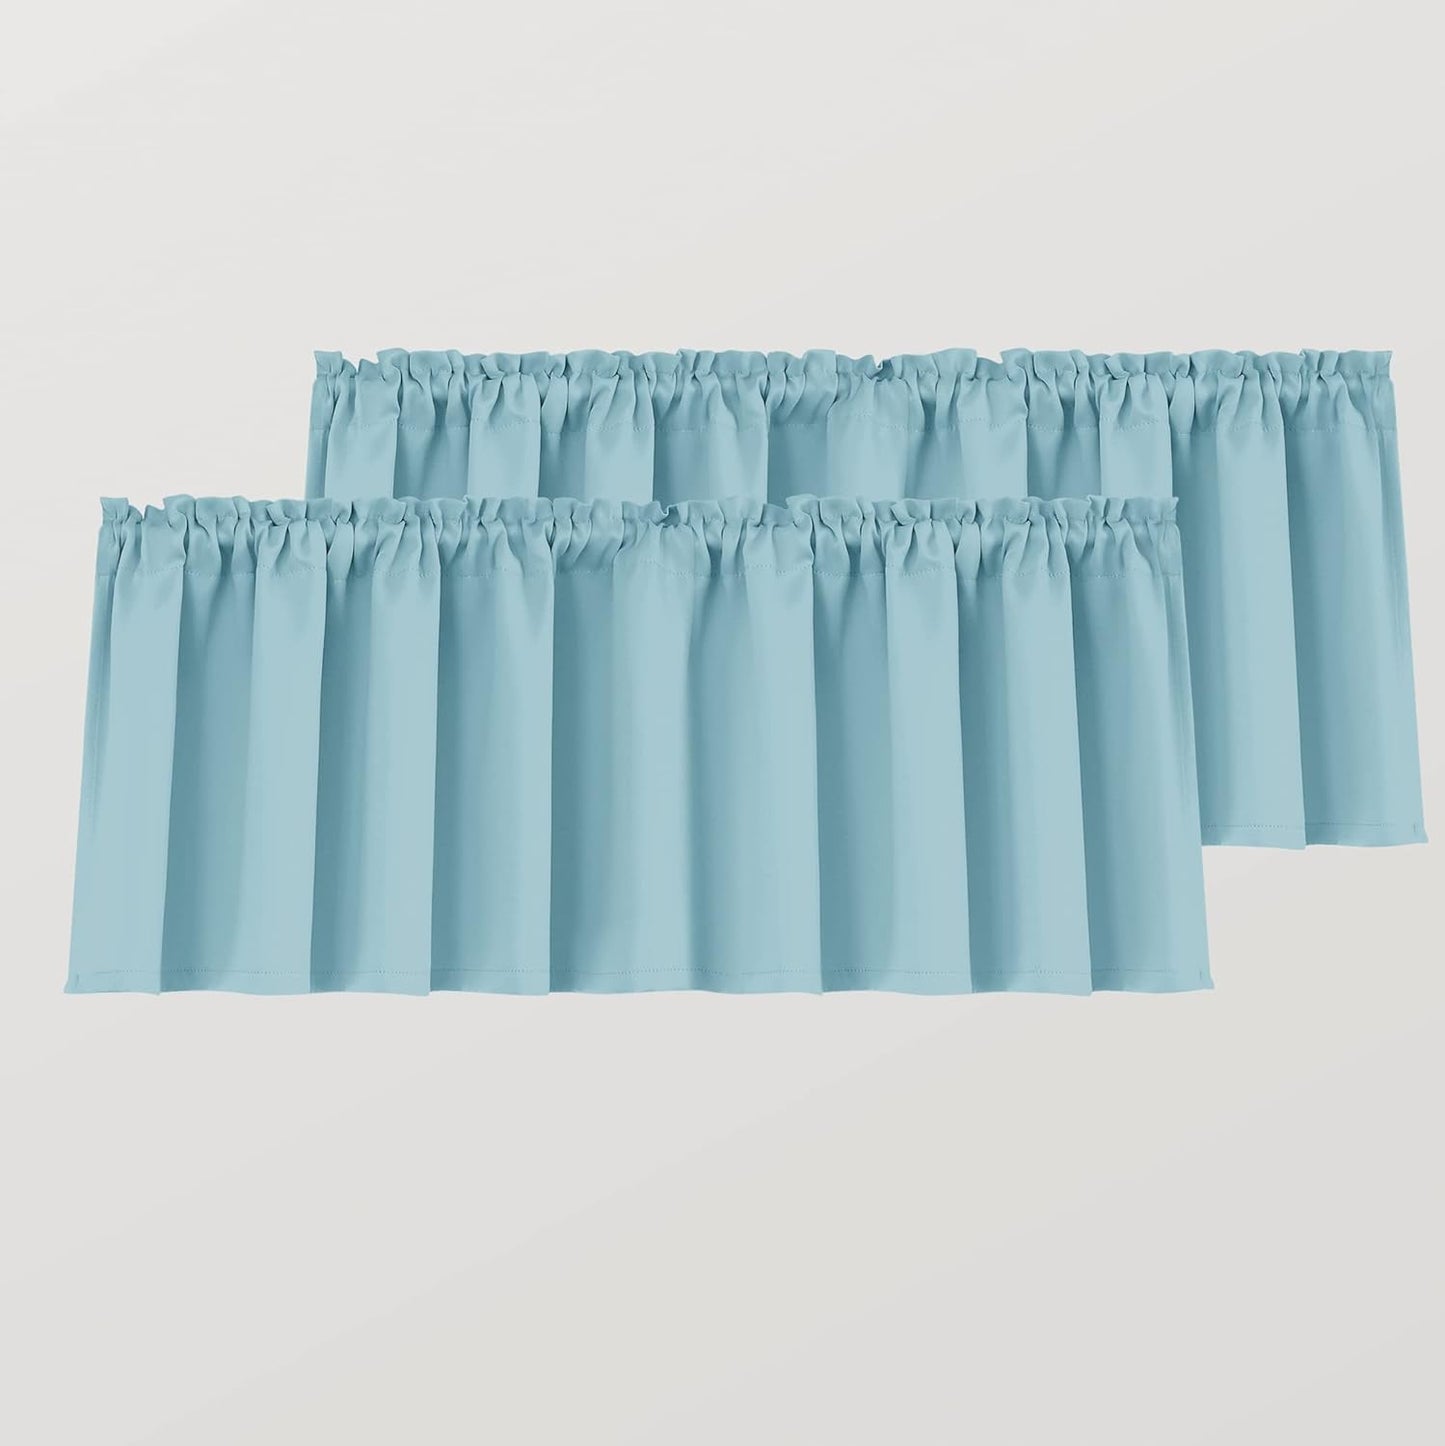 Mrs.Naturall Beige Valance Curtains for Windows 36X16 Inch Length  MRS.NATURALL TEXTILE Light Blue 36X16 